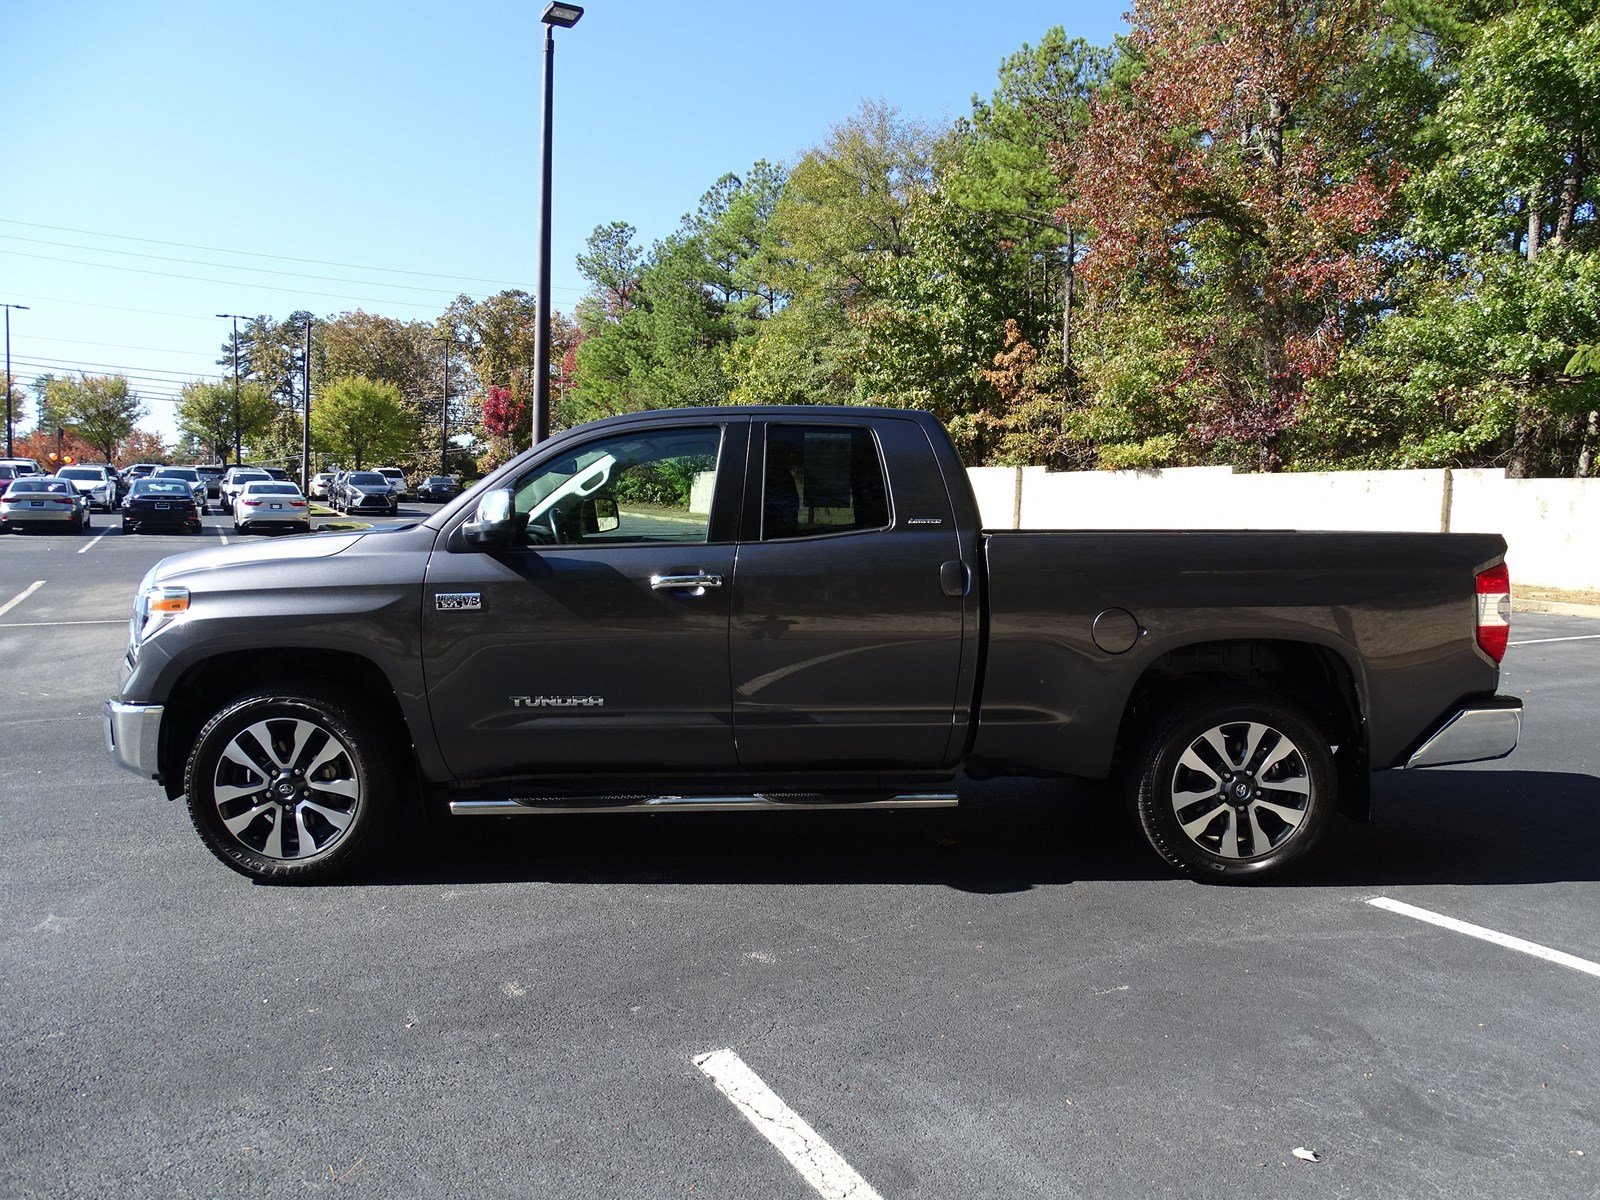 Pre-Owned 2018 Toyota Tundra 2WD Limited Crew Cab Pickup in Union City